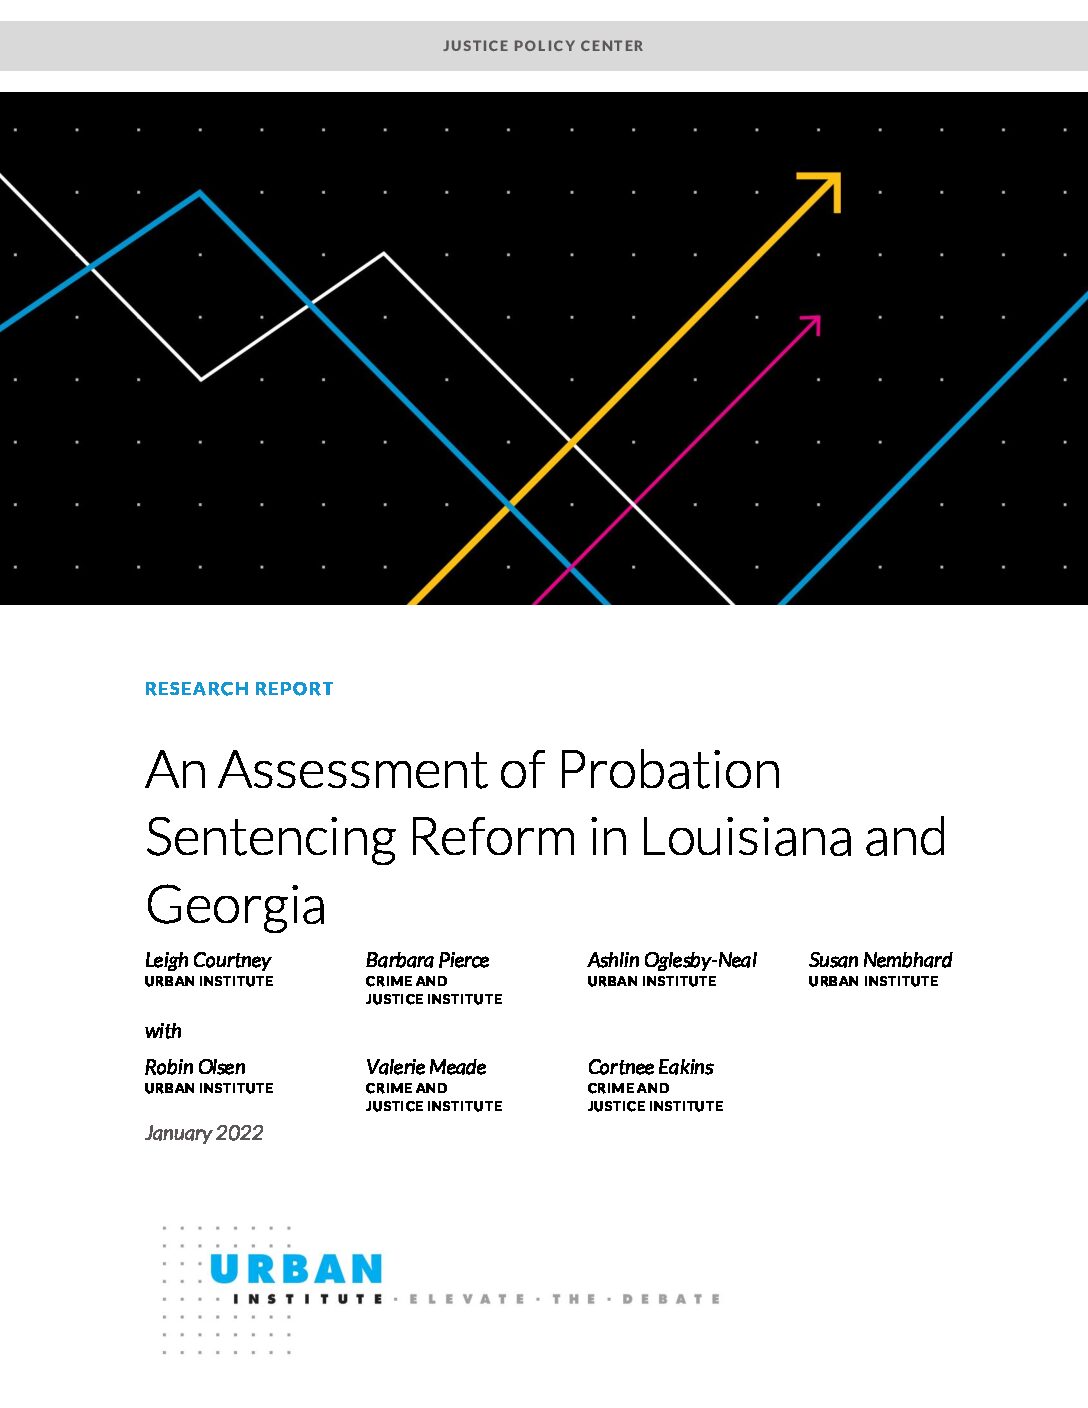 An Assessment of Probation Sentencing Reform in Louisiana and Georgia